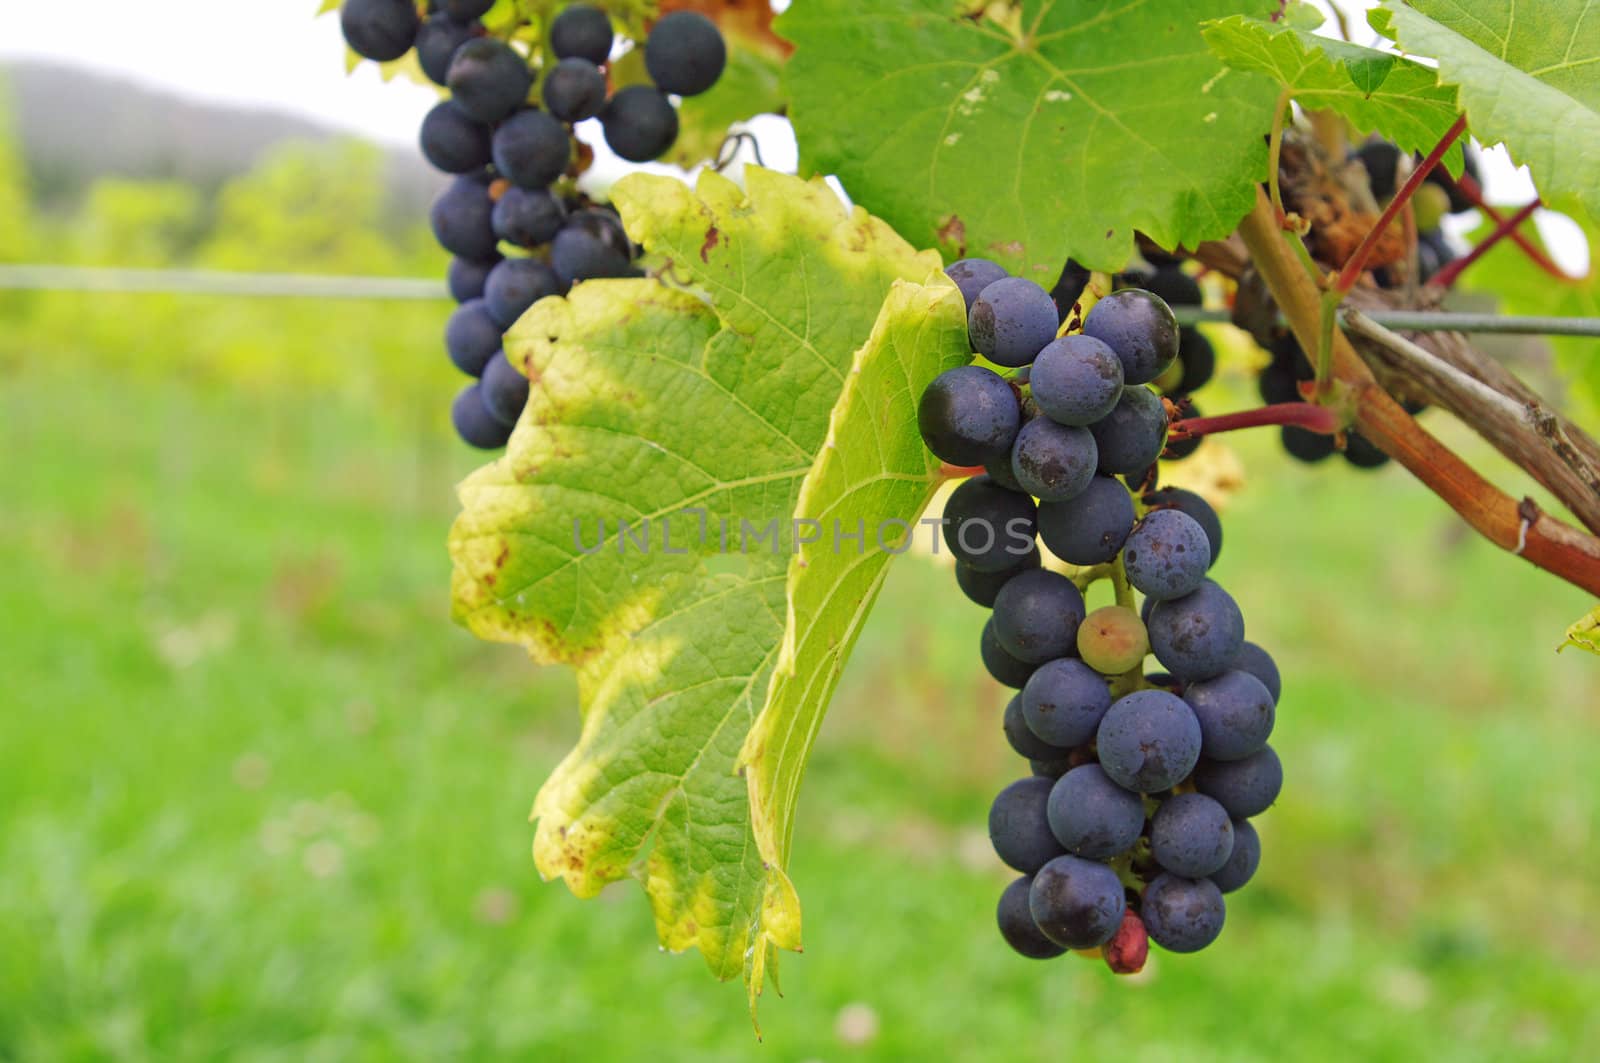 Grapes on the Vine by edcorey